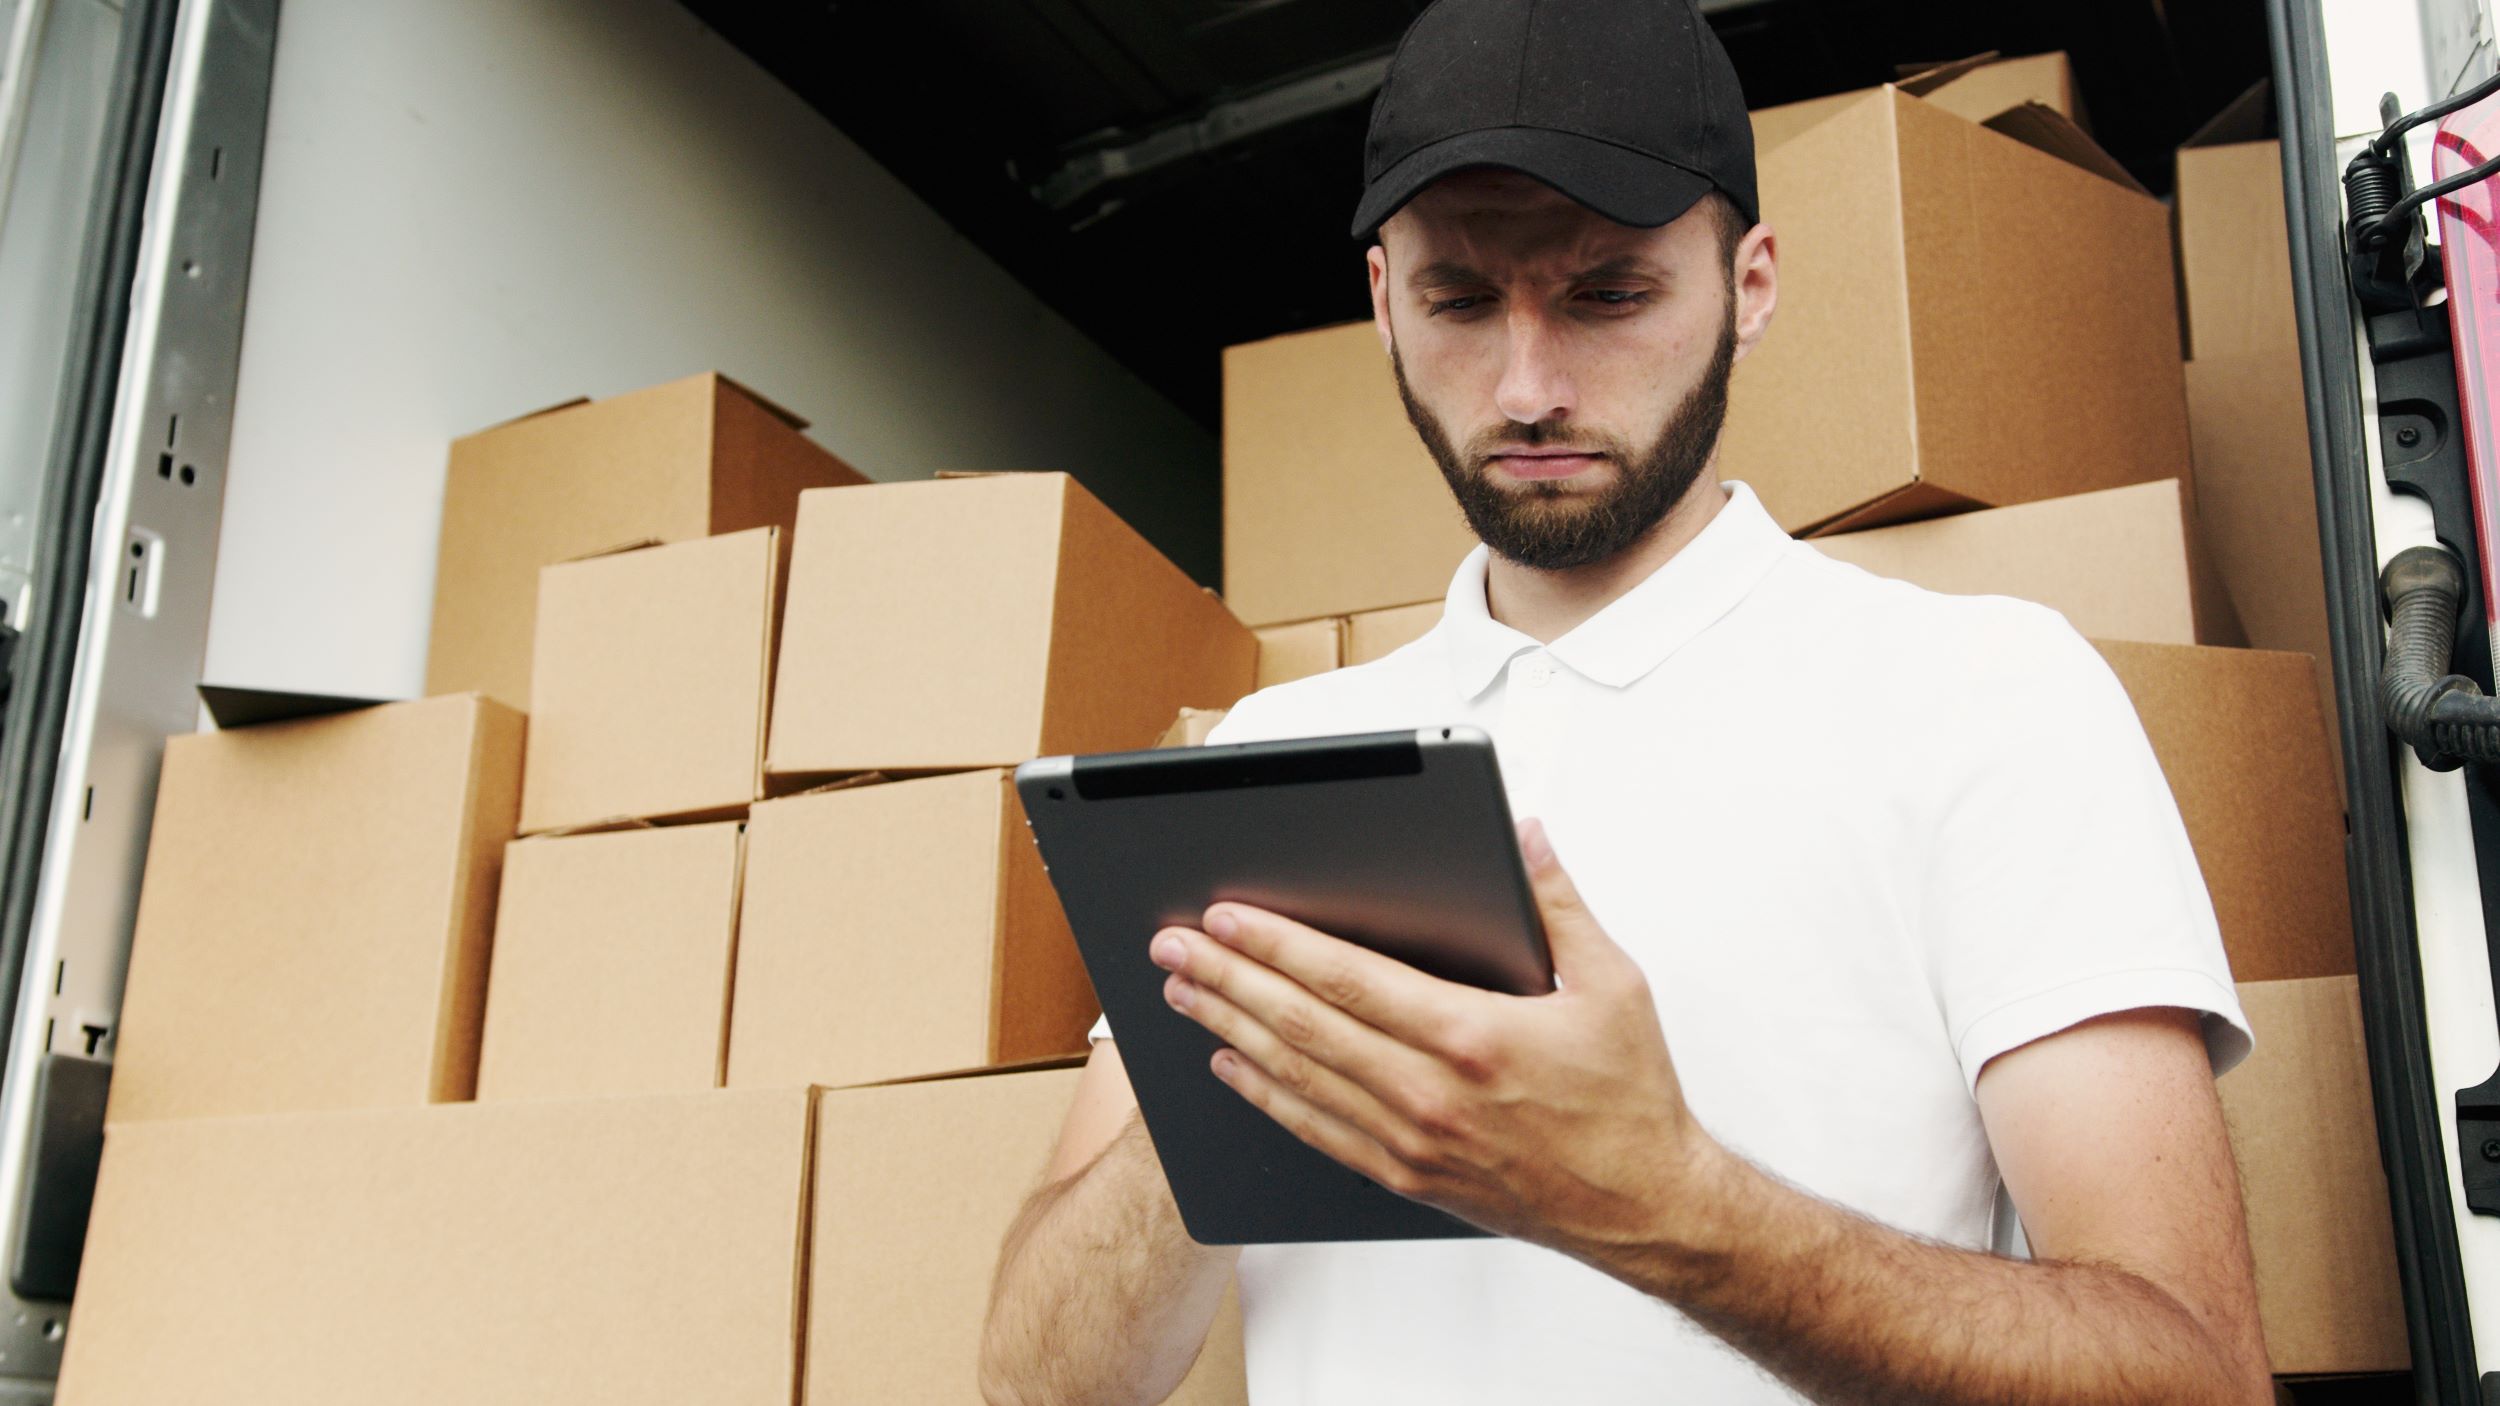 man using a tablet; piles of boxes behind him